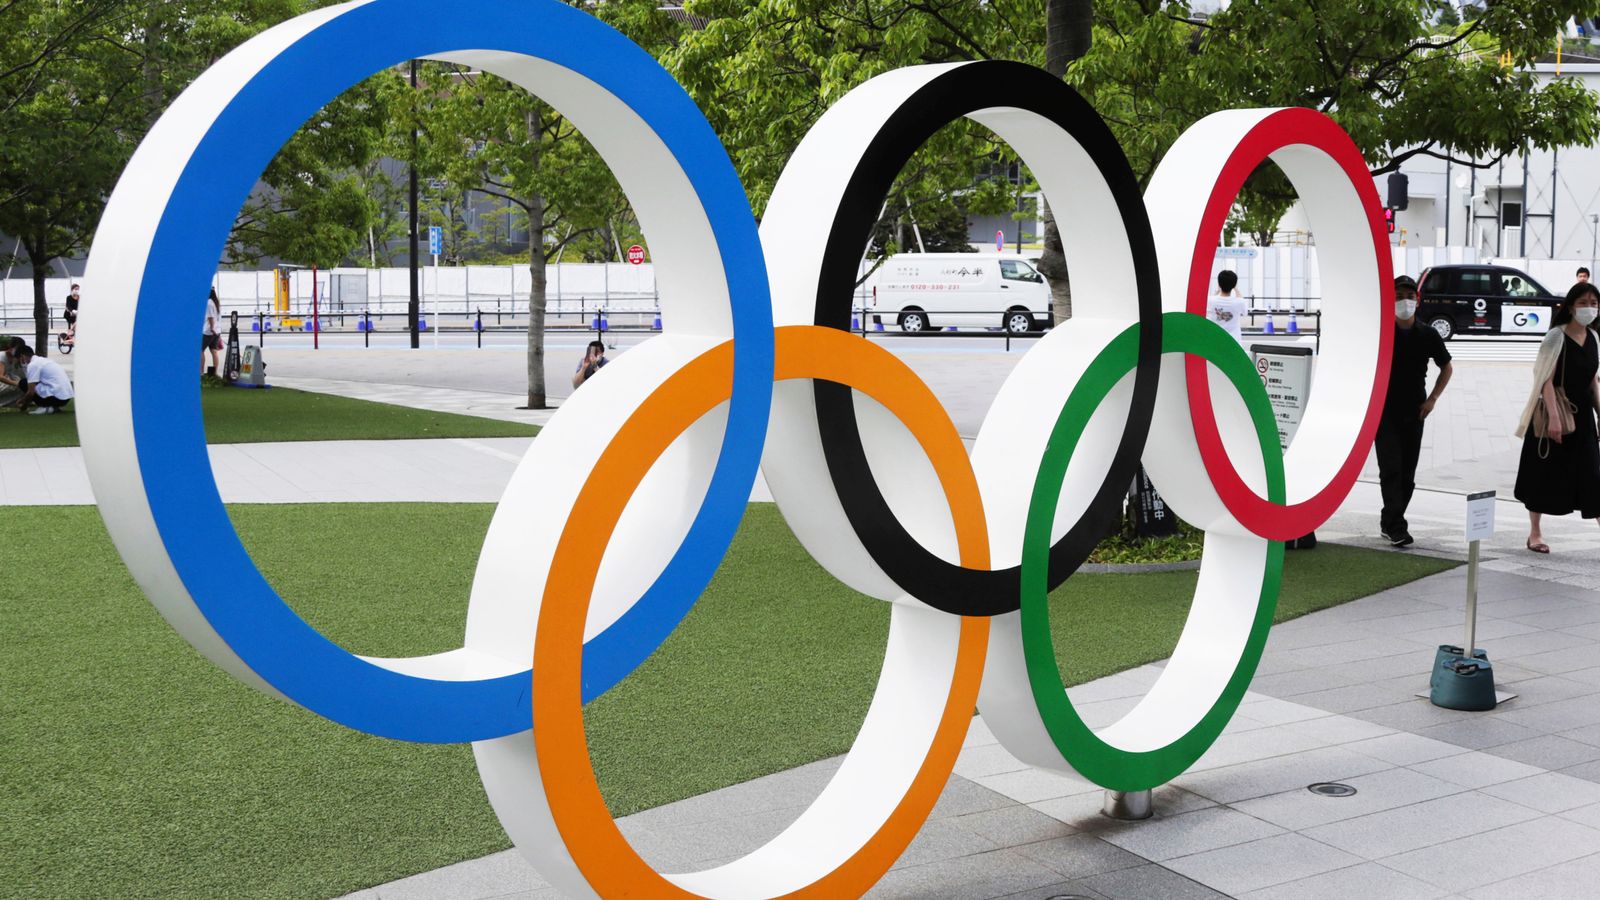 Brisbane proposed as host for 2032 Olympic Games by IOC executive boad